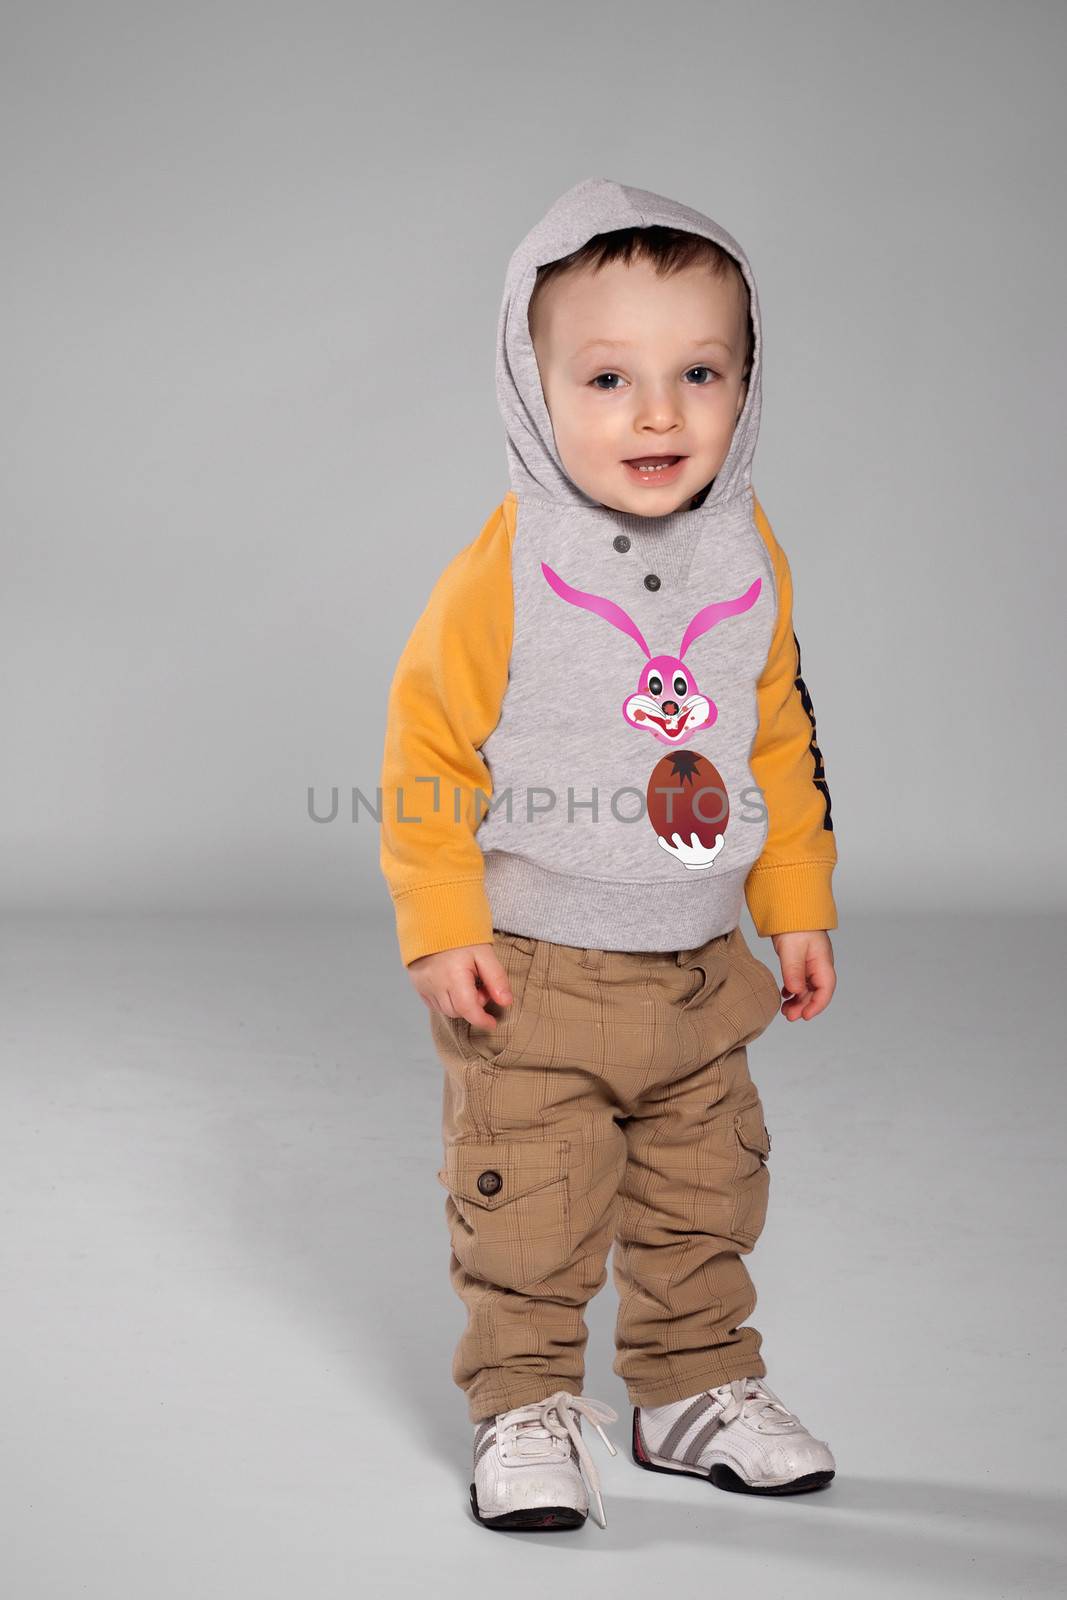 Toddler boy standing in the Easter Bunny sweatshirt with a hood on his head and sneakers